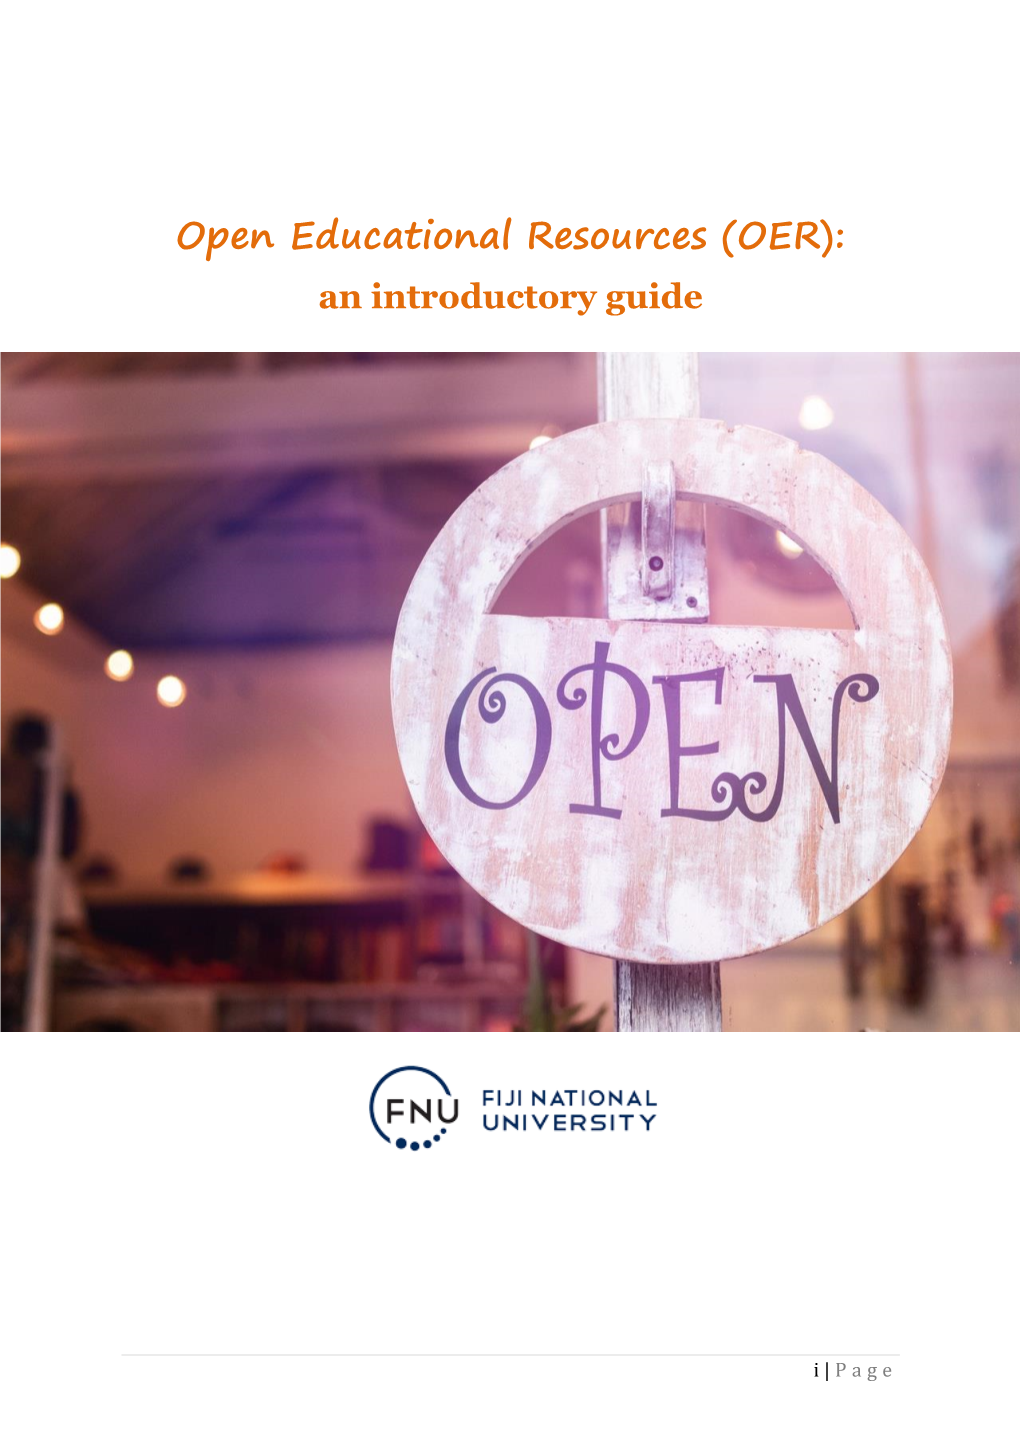 OER): an Introductory Guide